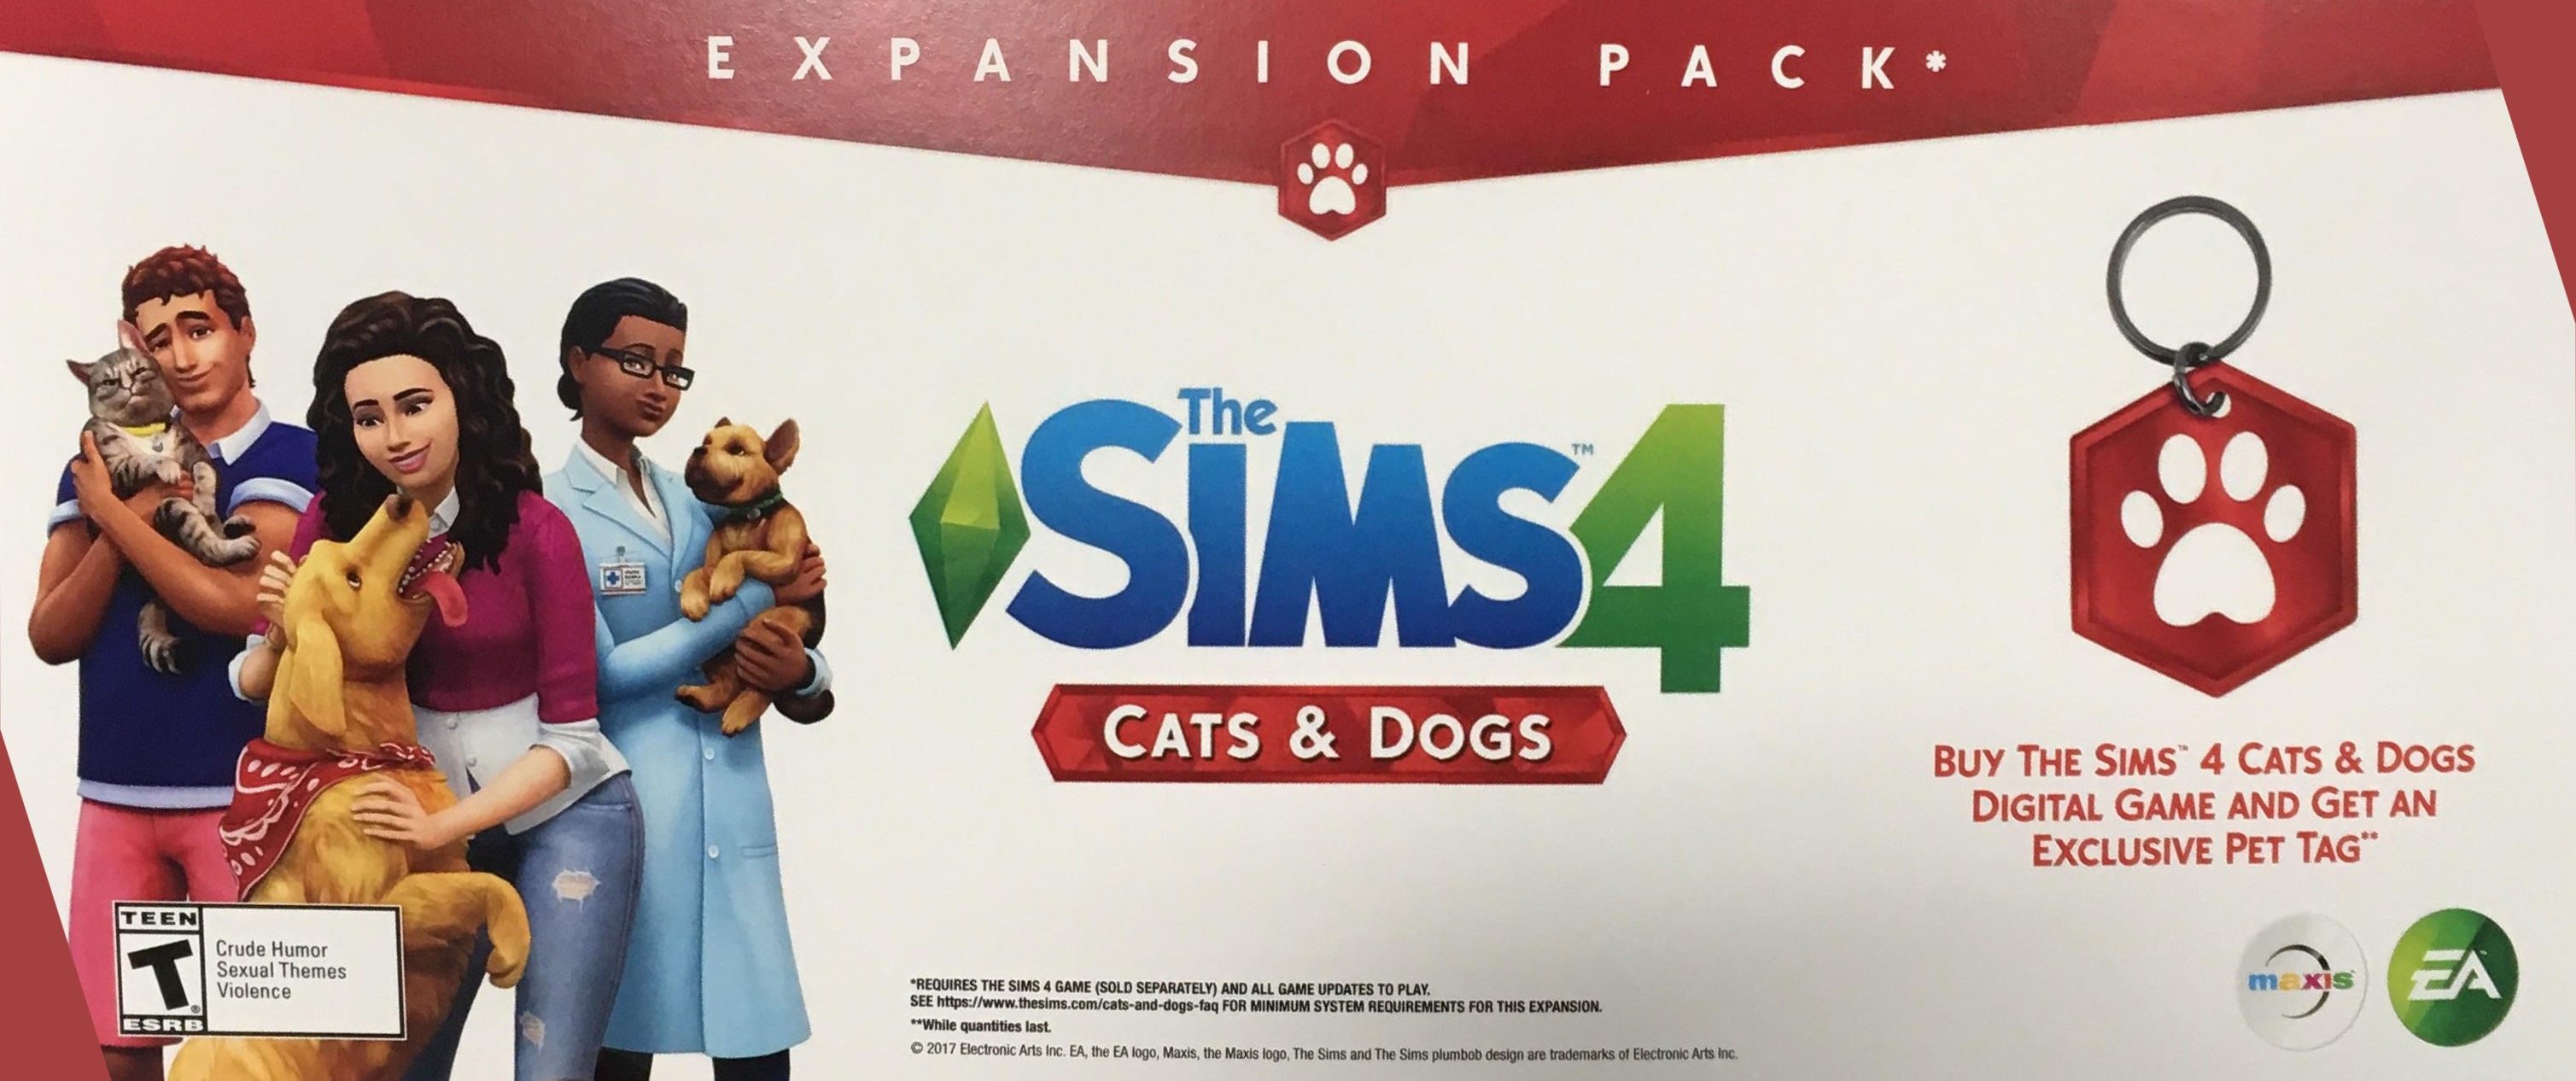 Free codes for sims 4 expansion packs dasttx